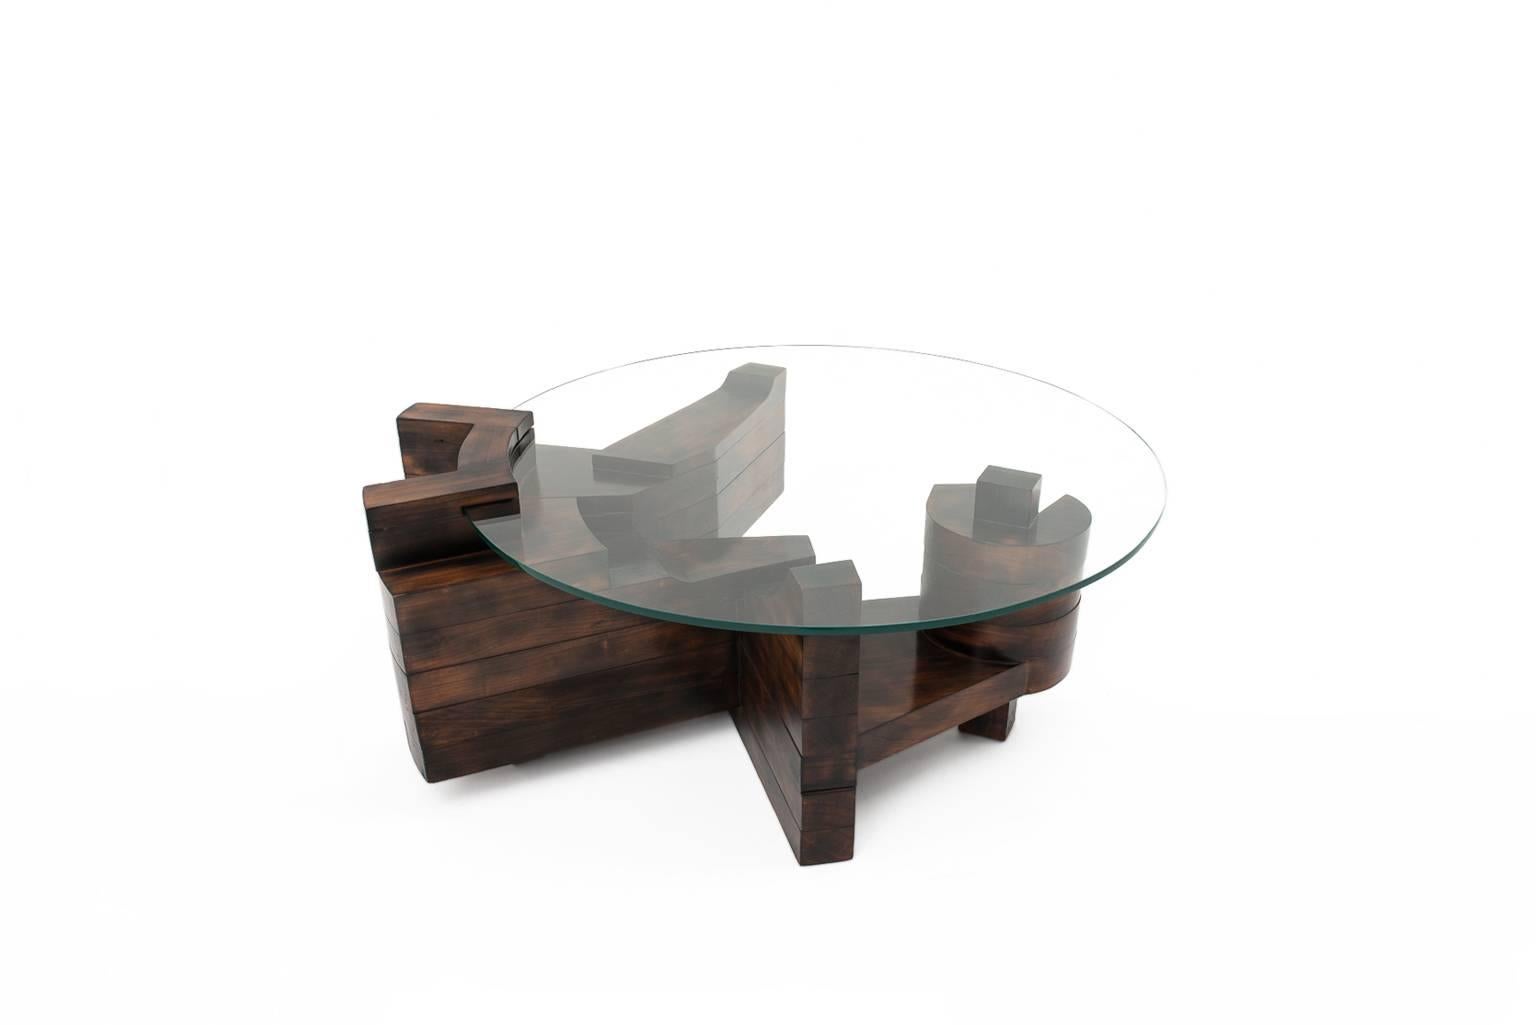 Unique 'one of a kind' wooden Sculptural coffee table by Nerone and Patuzzi for Gruppo NP2. Specially made for the Bienalle in Venice, 1967 and bought there by it's former owner. 
This particular table was the inspiration for the later model from